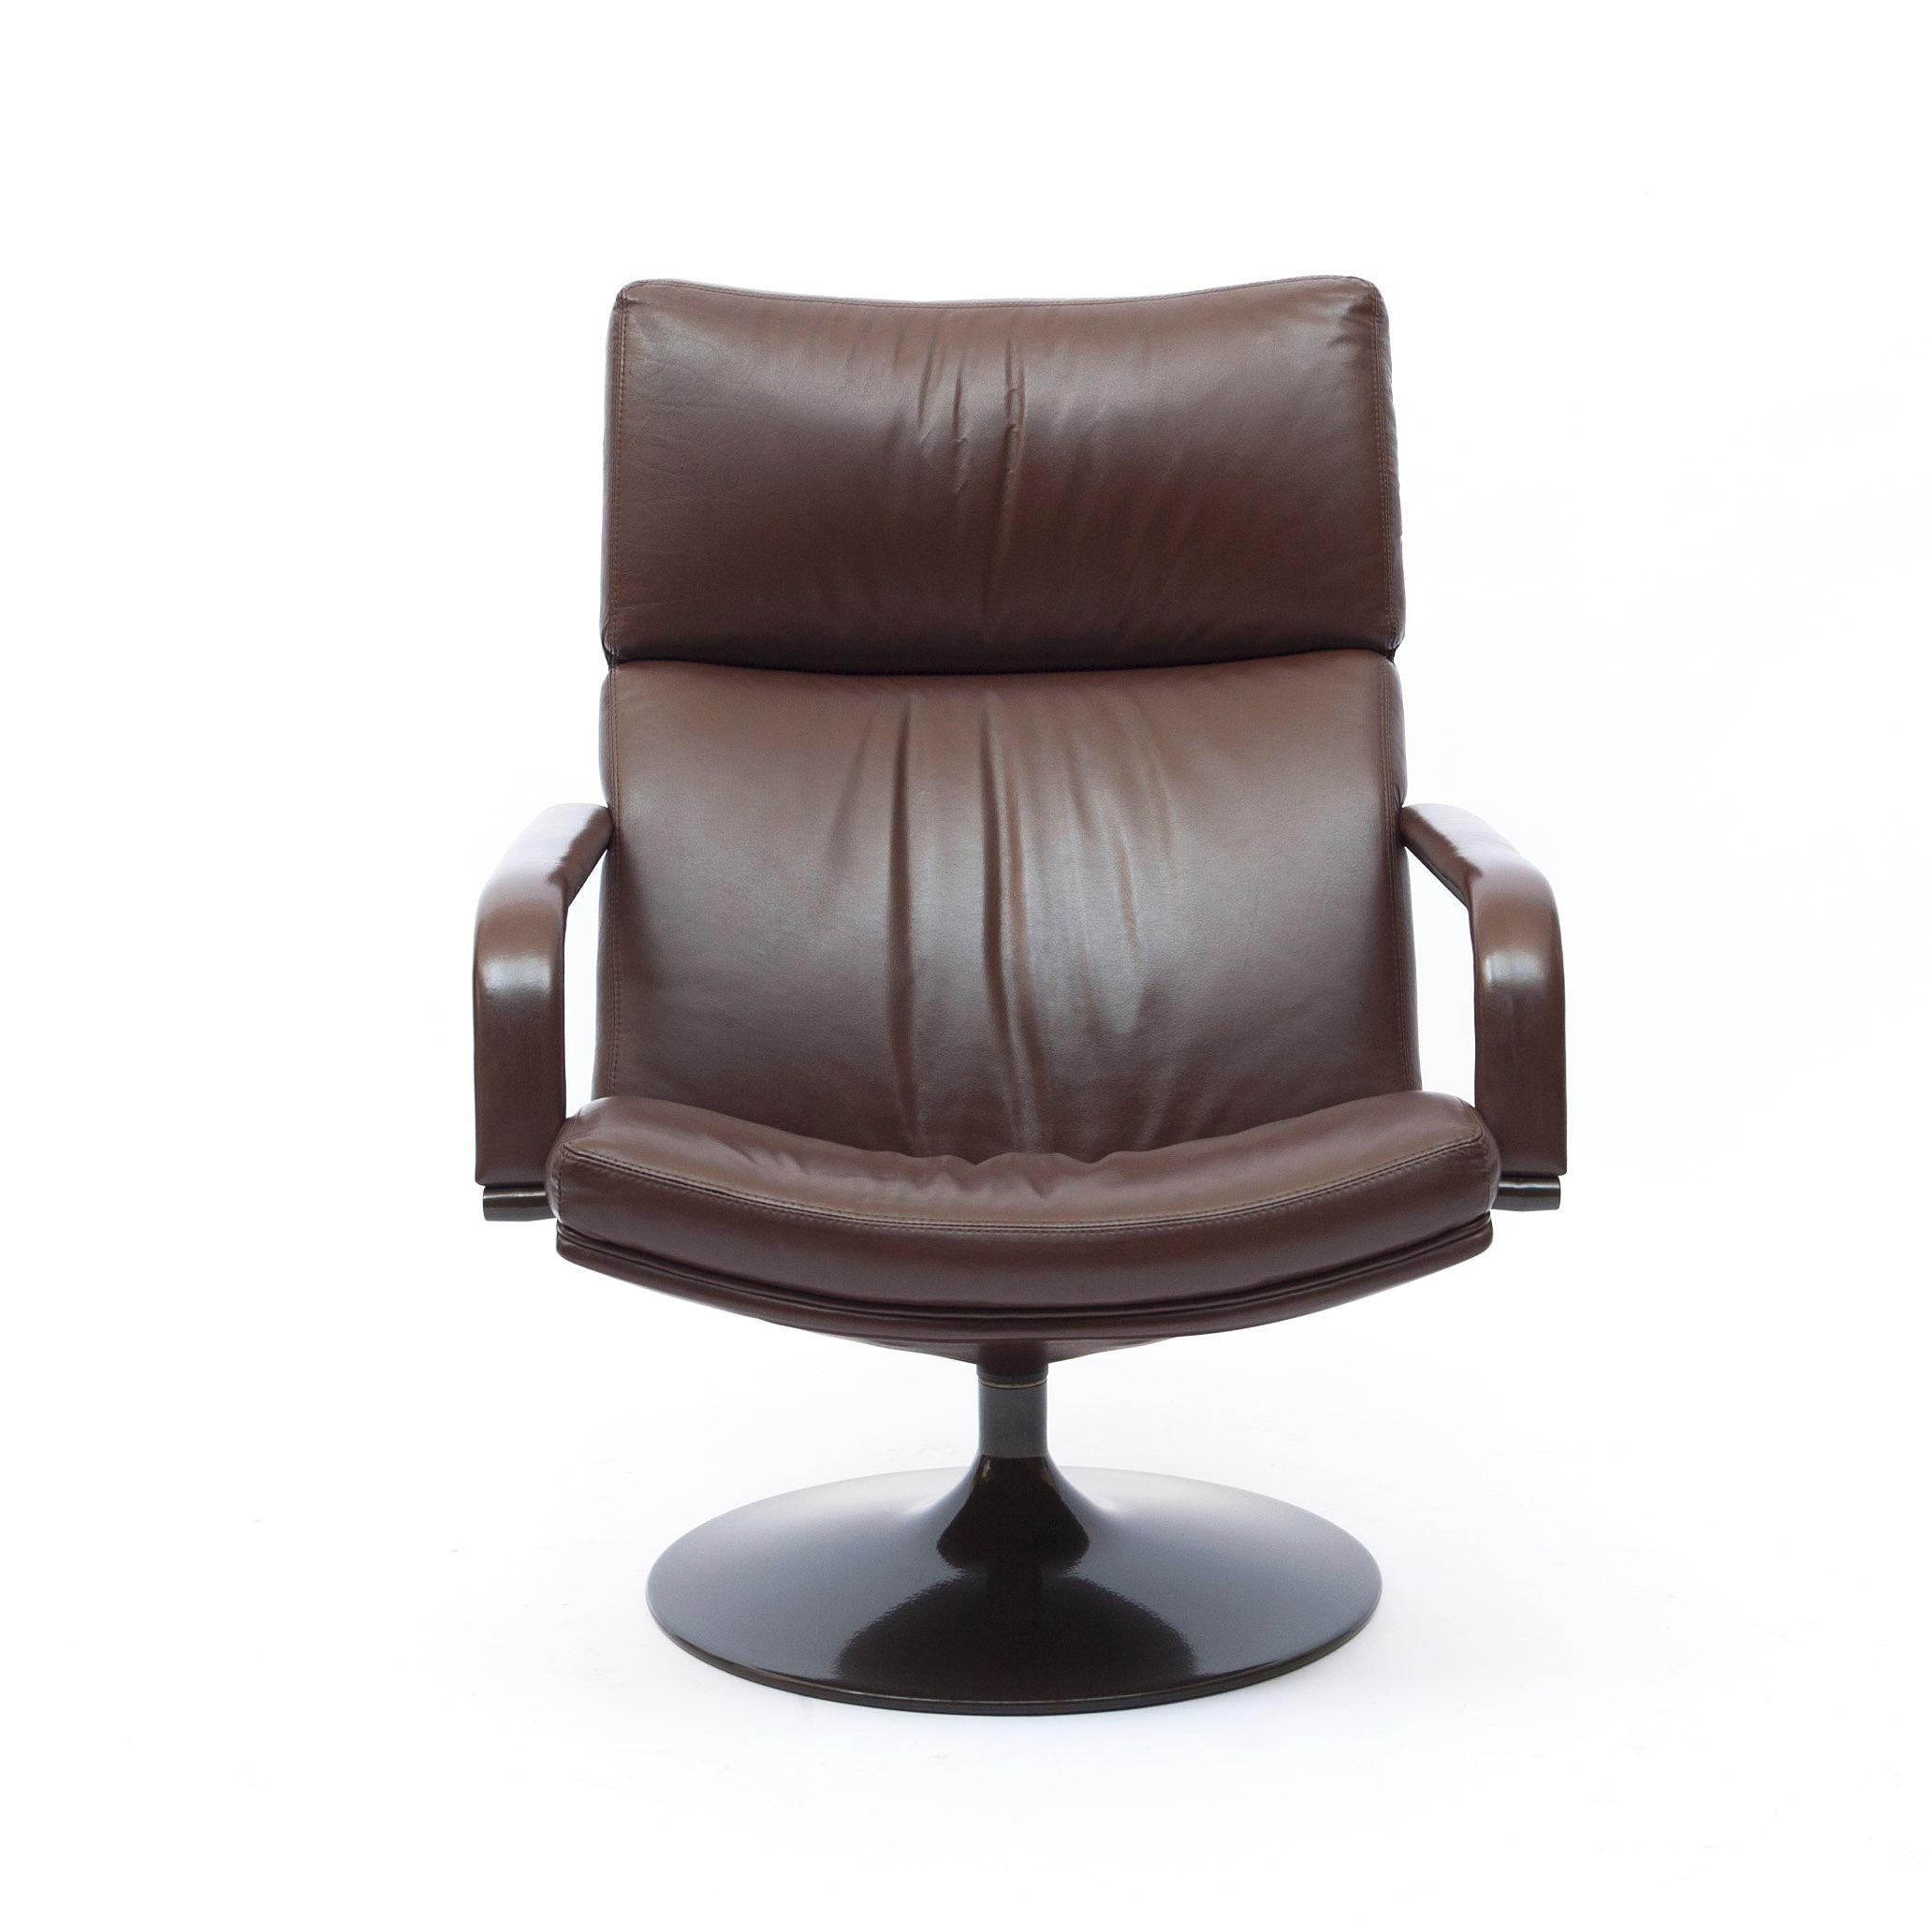 Braun leather armchair with metal frame by Geoffrey Harcourt. The stylish leather covers both of the arms as well as the bottom and back of chair. Good original condition. A luxury chair for day-dreaming, relaxing or holding a conversation.